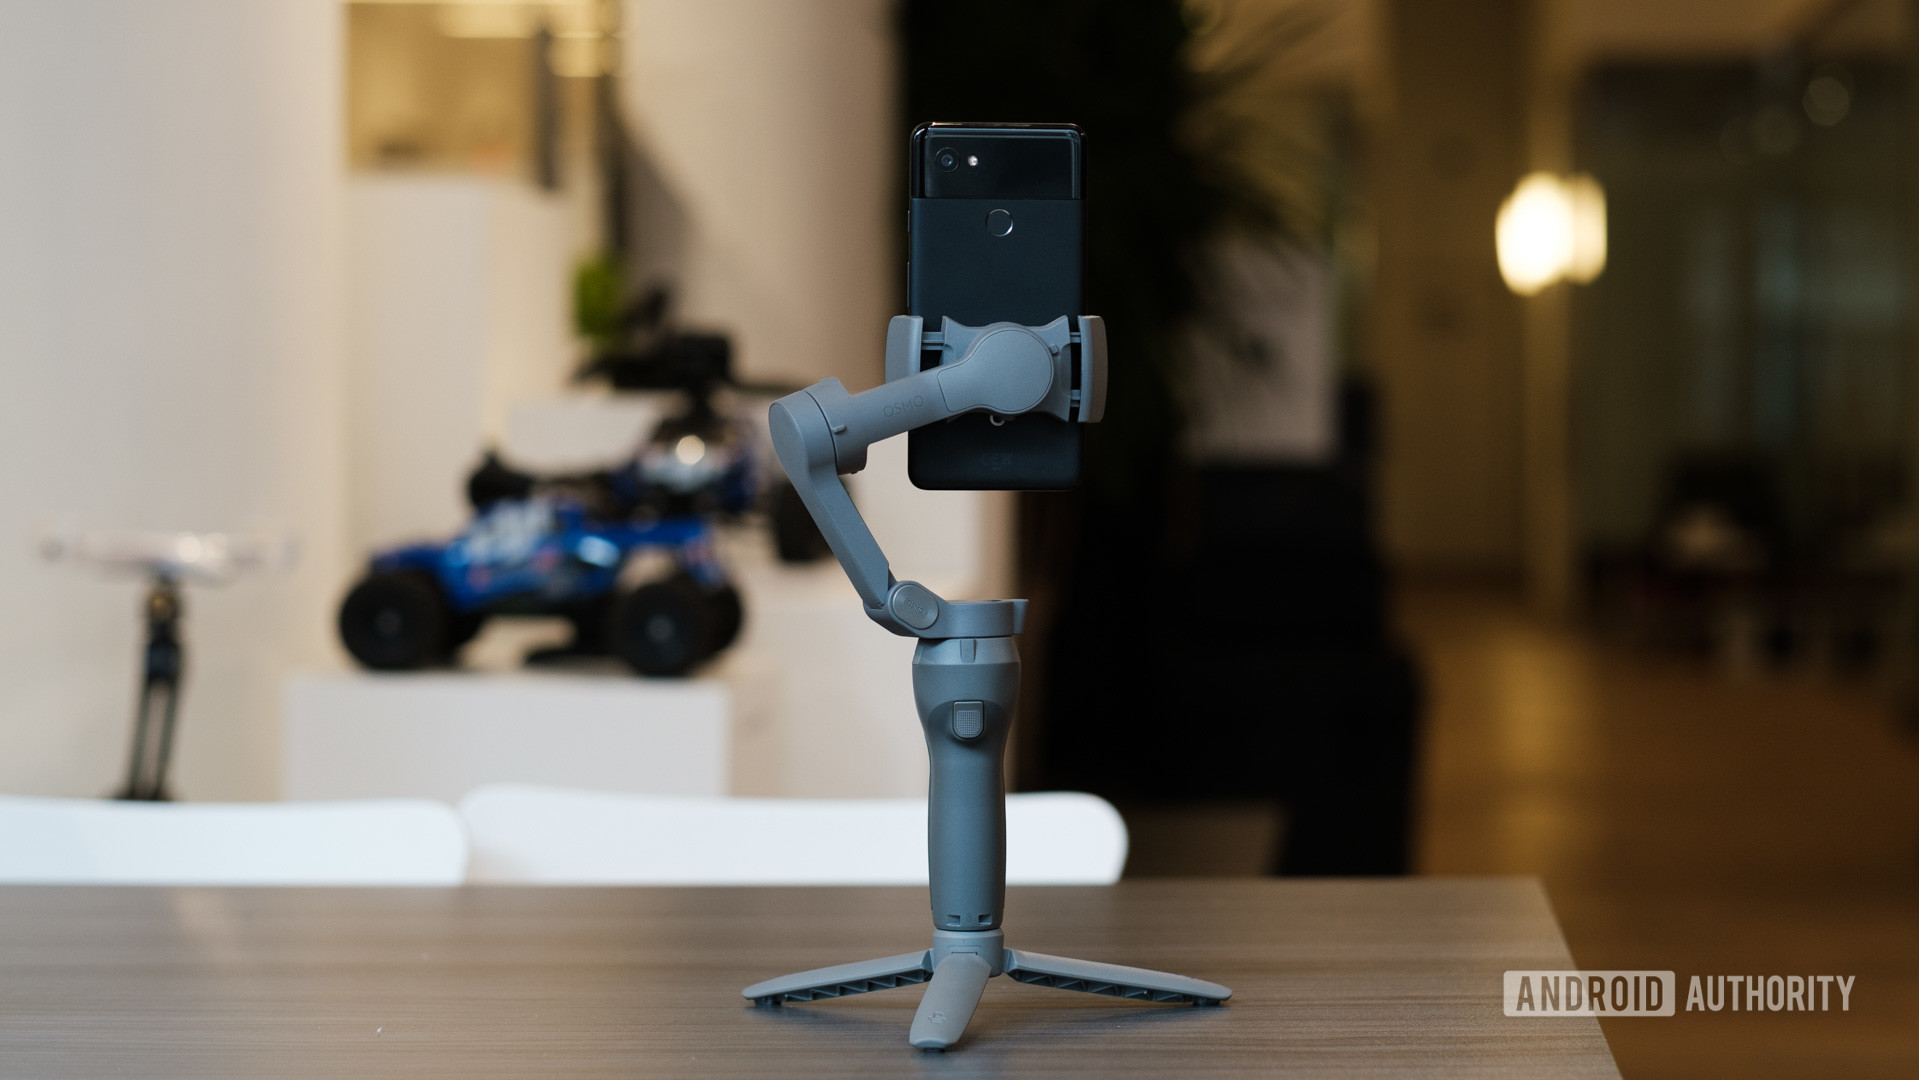 DJI Osmo Mobile 3 on table with Pixel 2